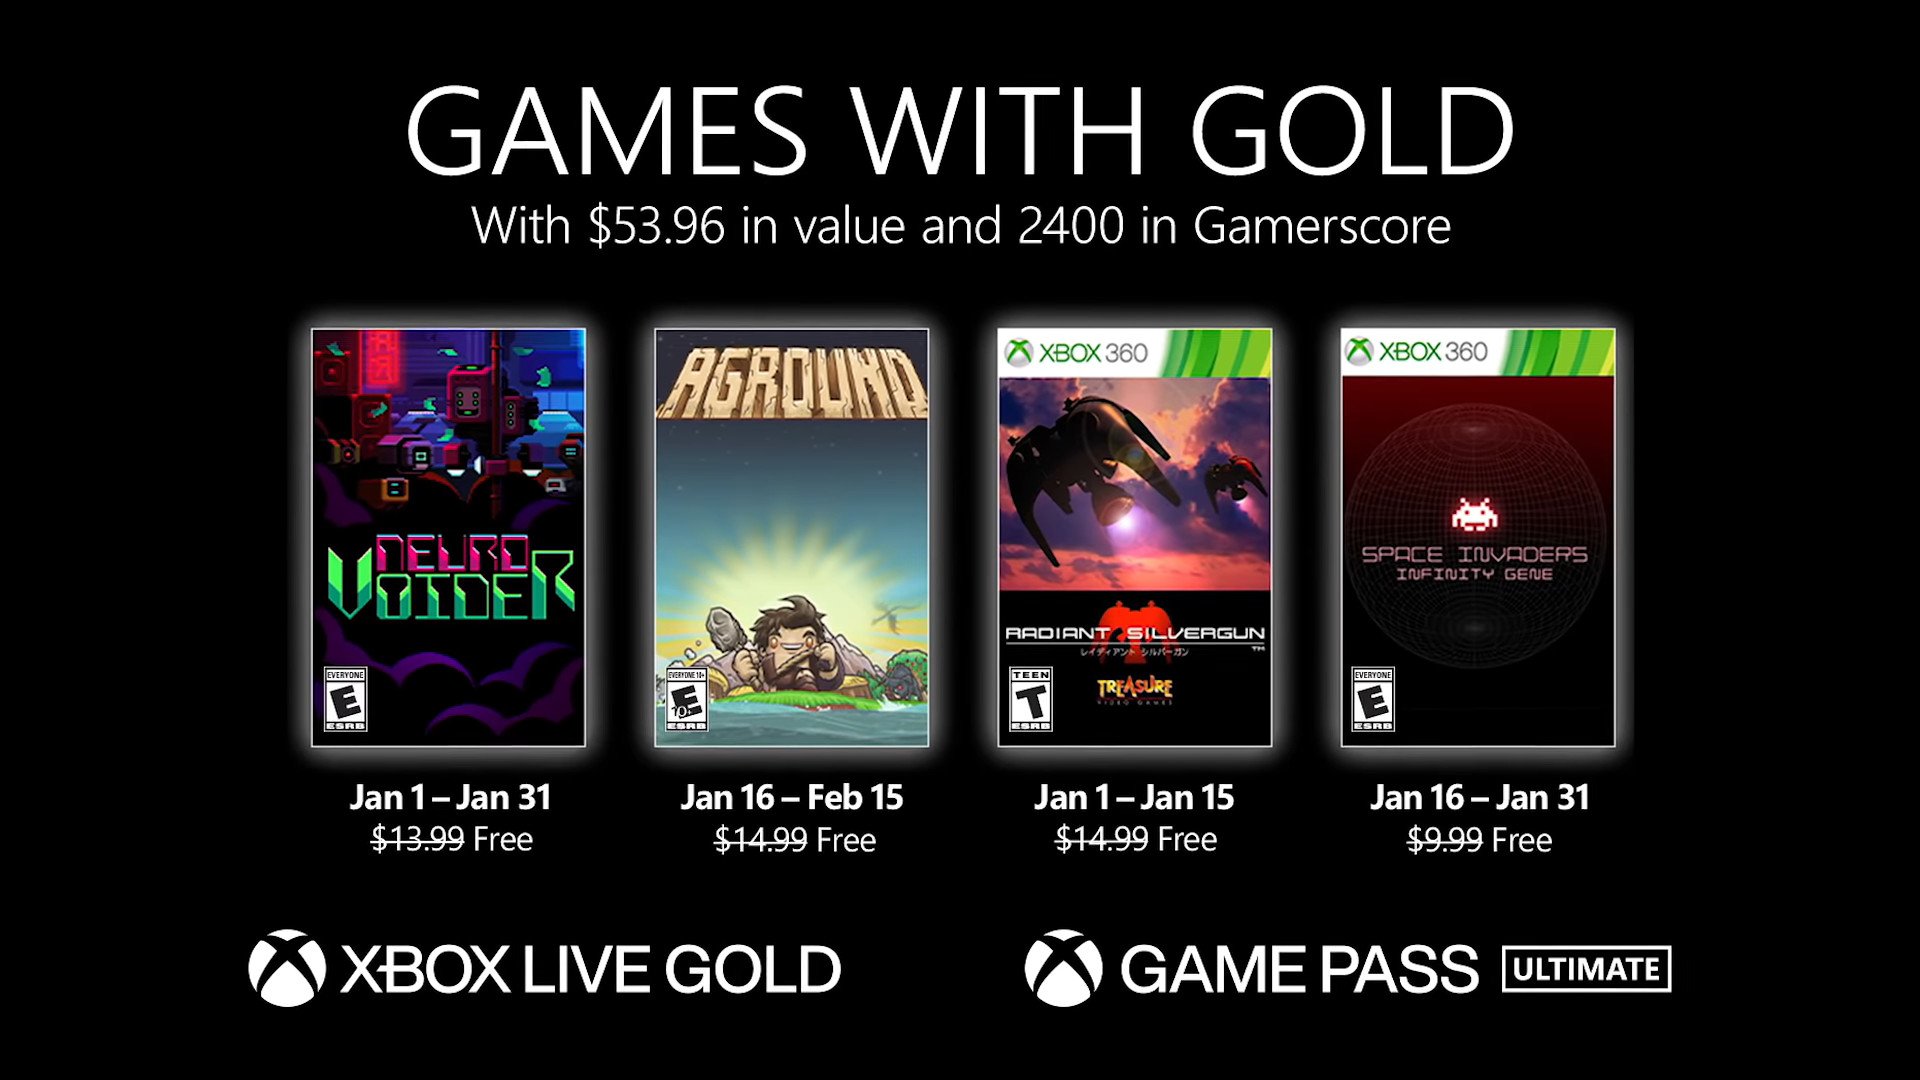 Xbox Announces Final Free Games with Gold Games